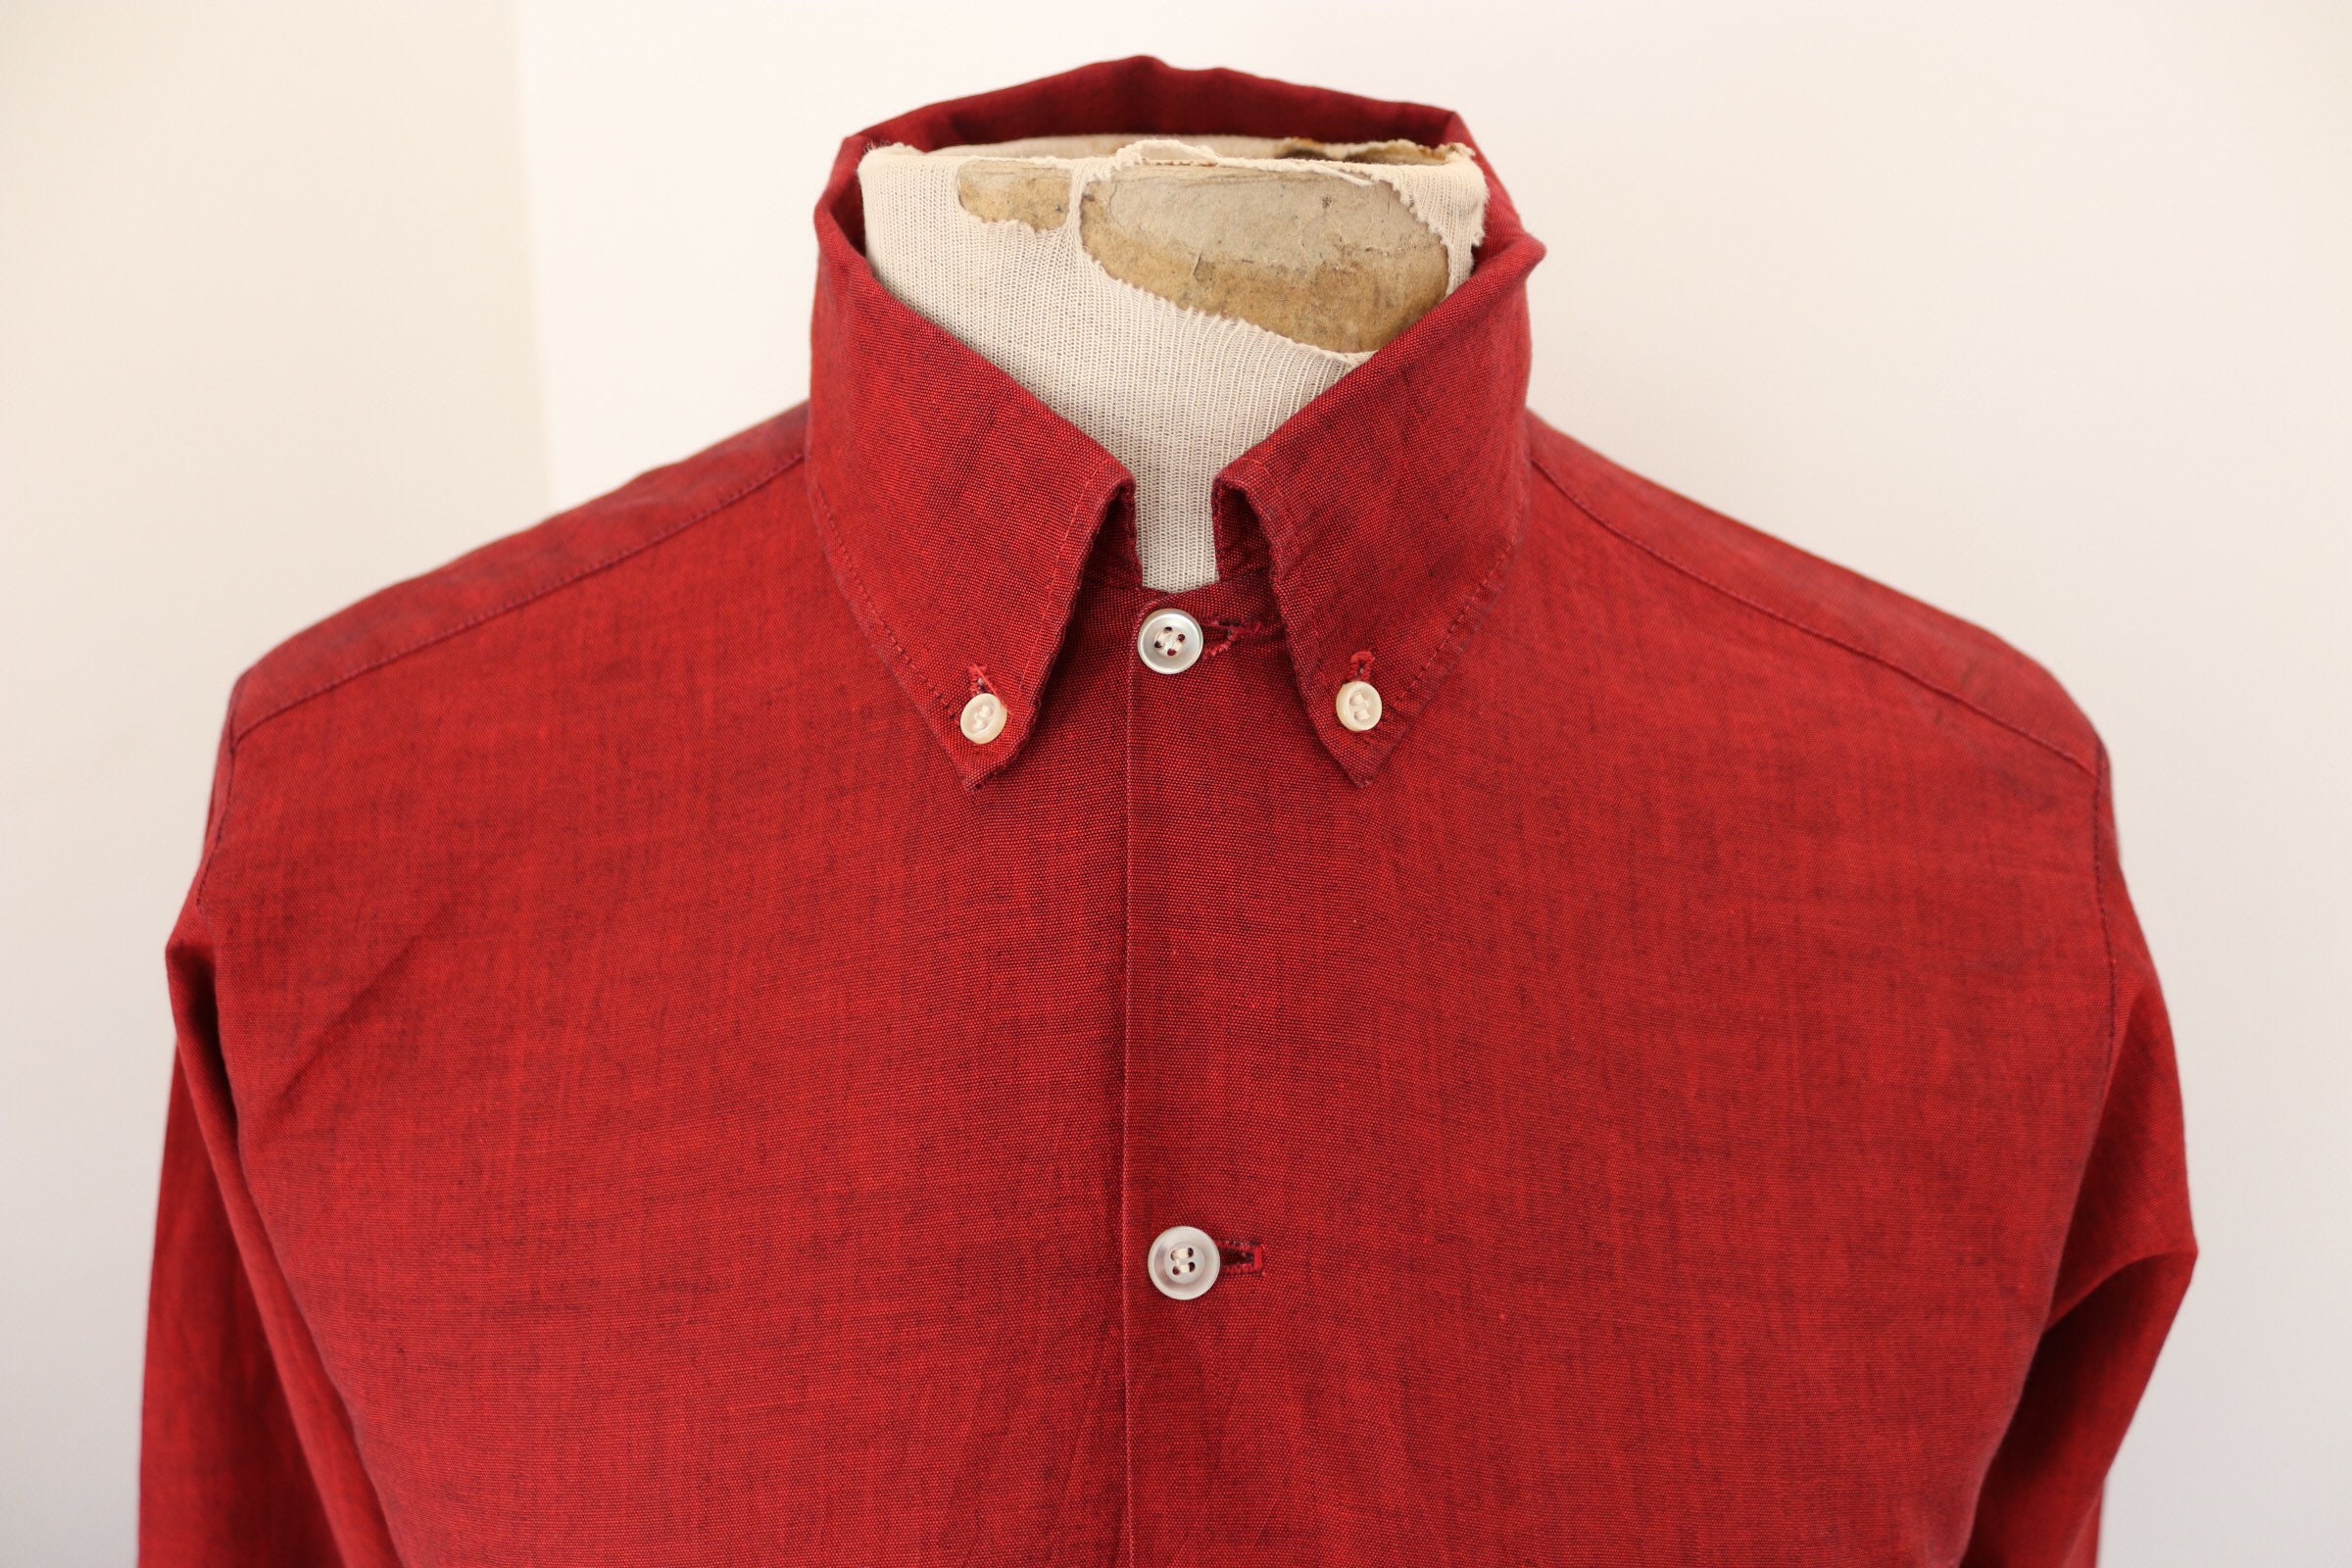 Vintage 1960s 60s iridescent red shirt permanent press Ivy League style ...